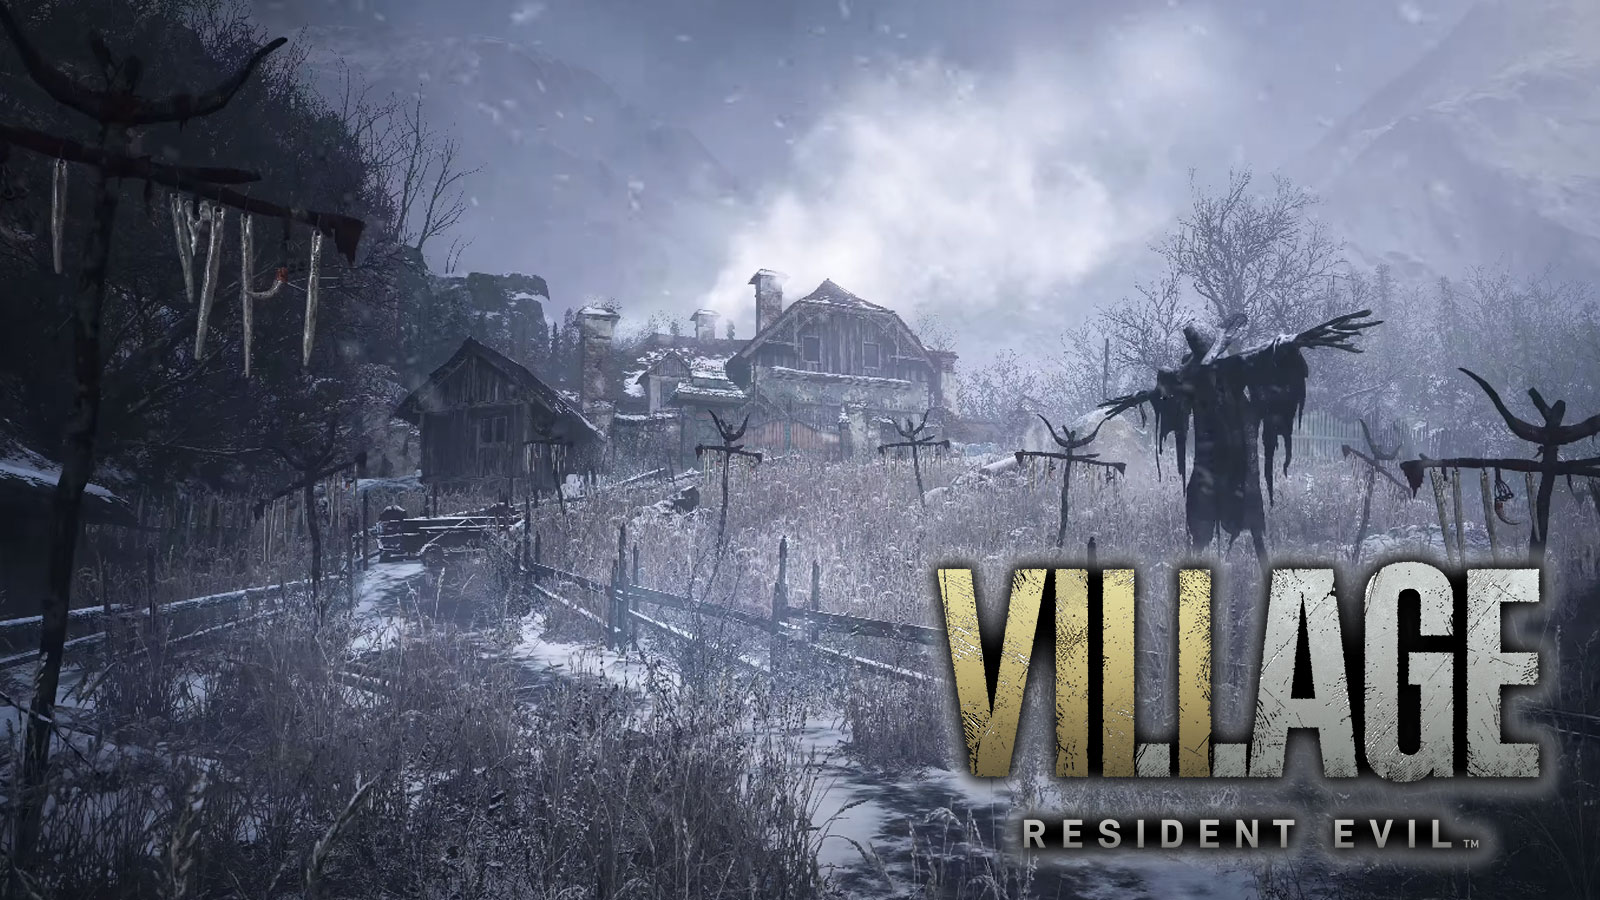 Resident evil village steam is currently фото 66